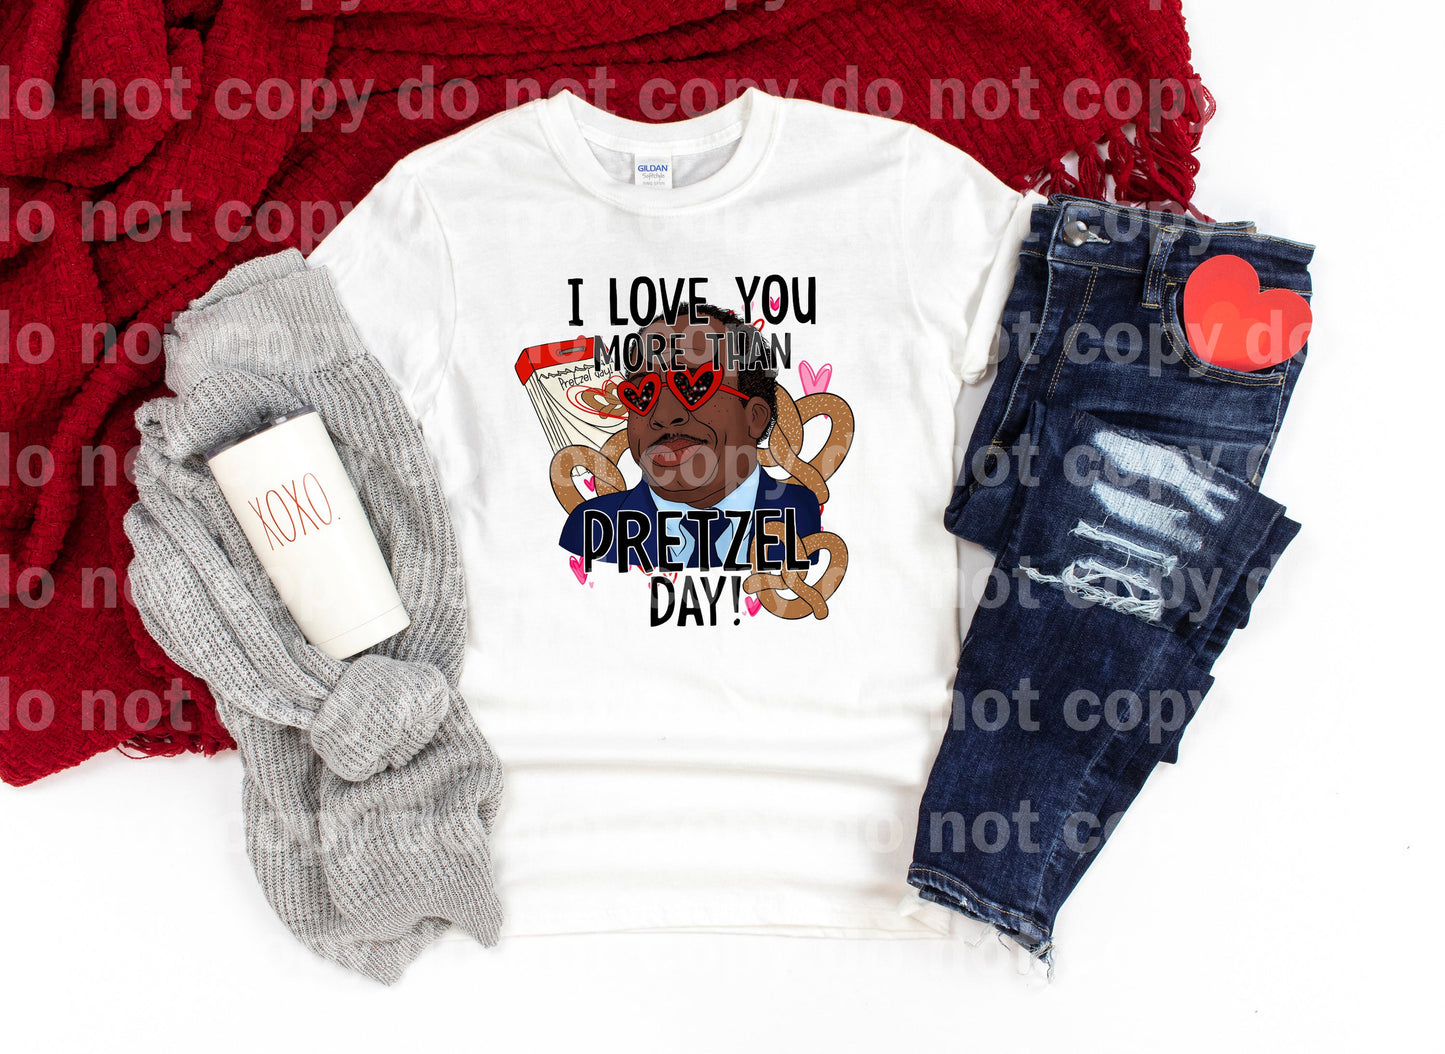 I Love You More Than Pretzel Day with Optional Sleeve Design Dream Print or Sublimation Print